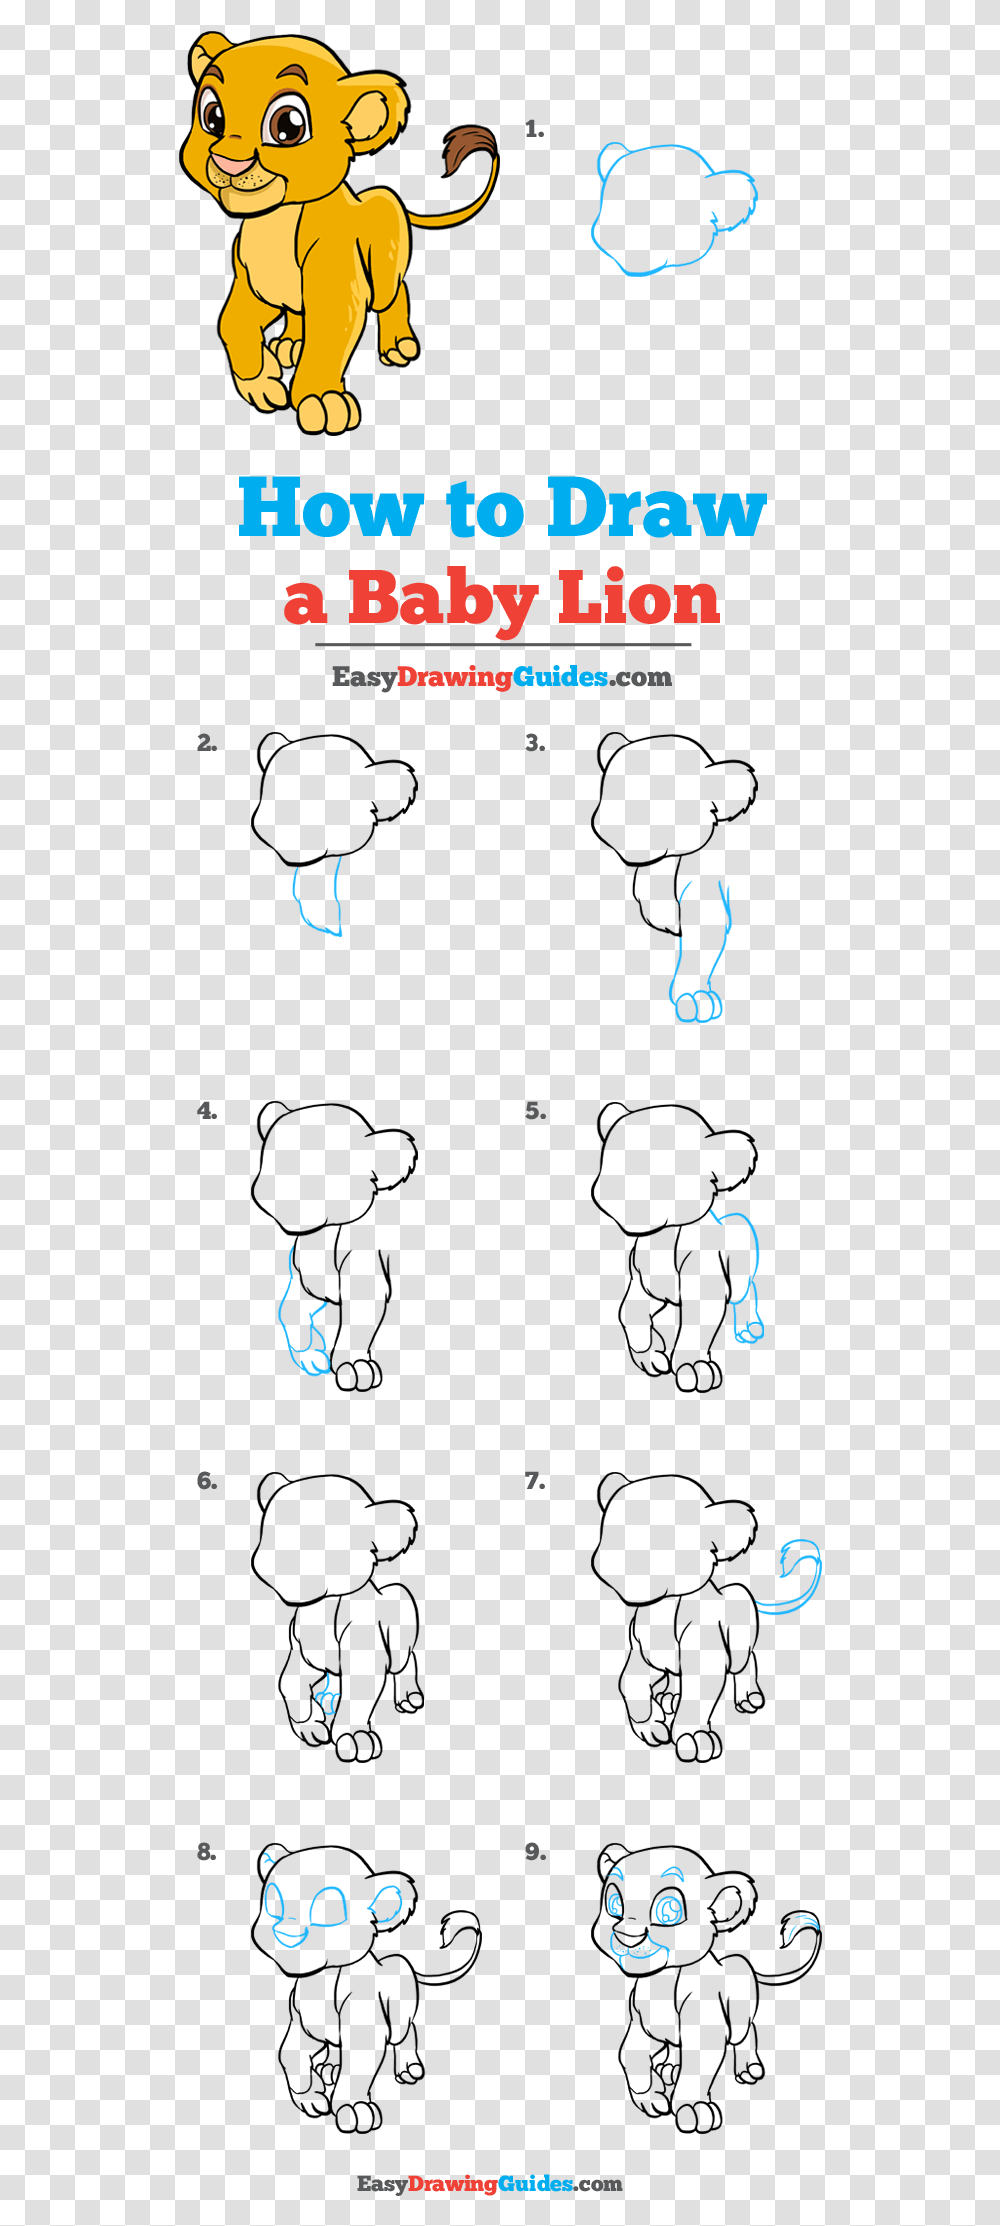 How To Draw Baby Lion Draw A Baby Lion, Outdoors, Nature, Light Transparent Png